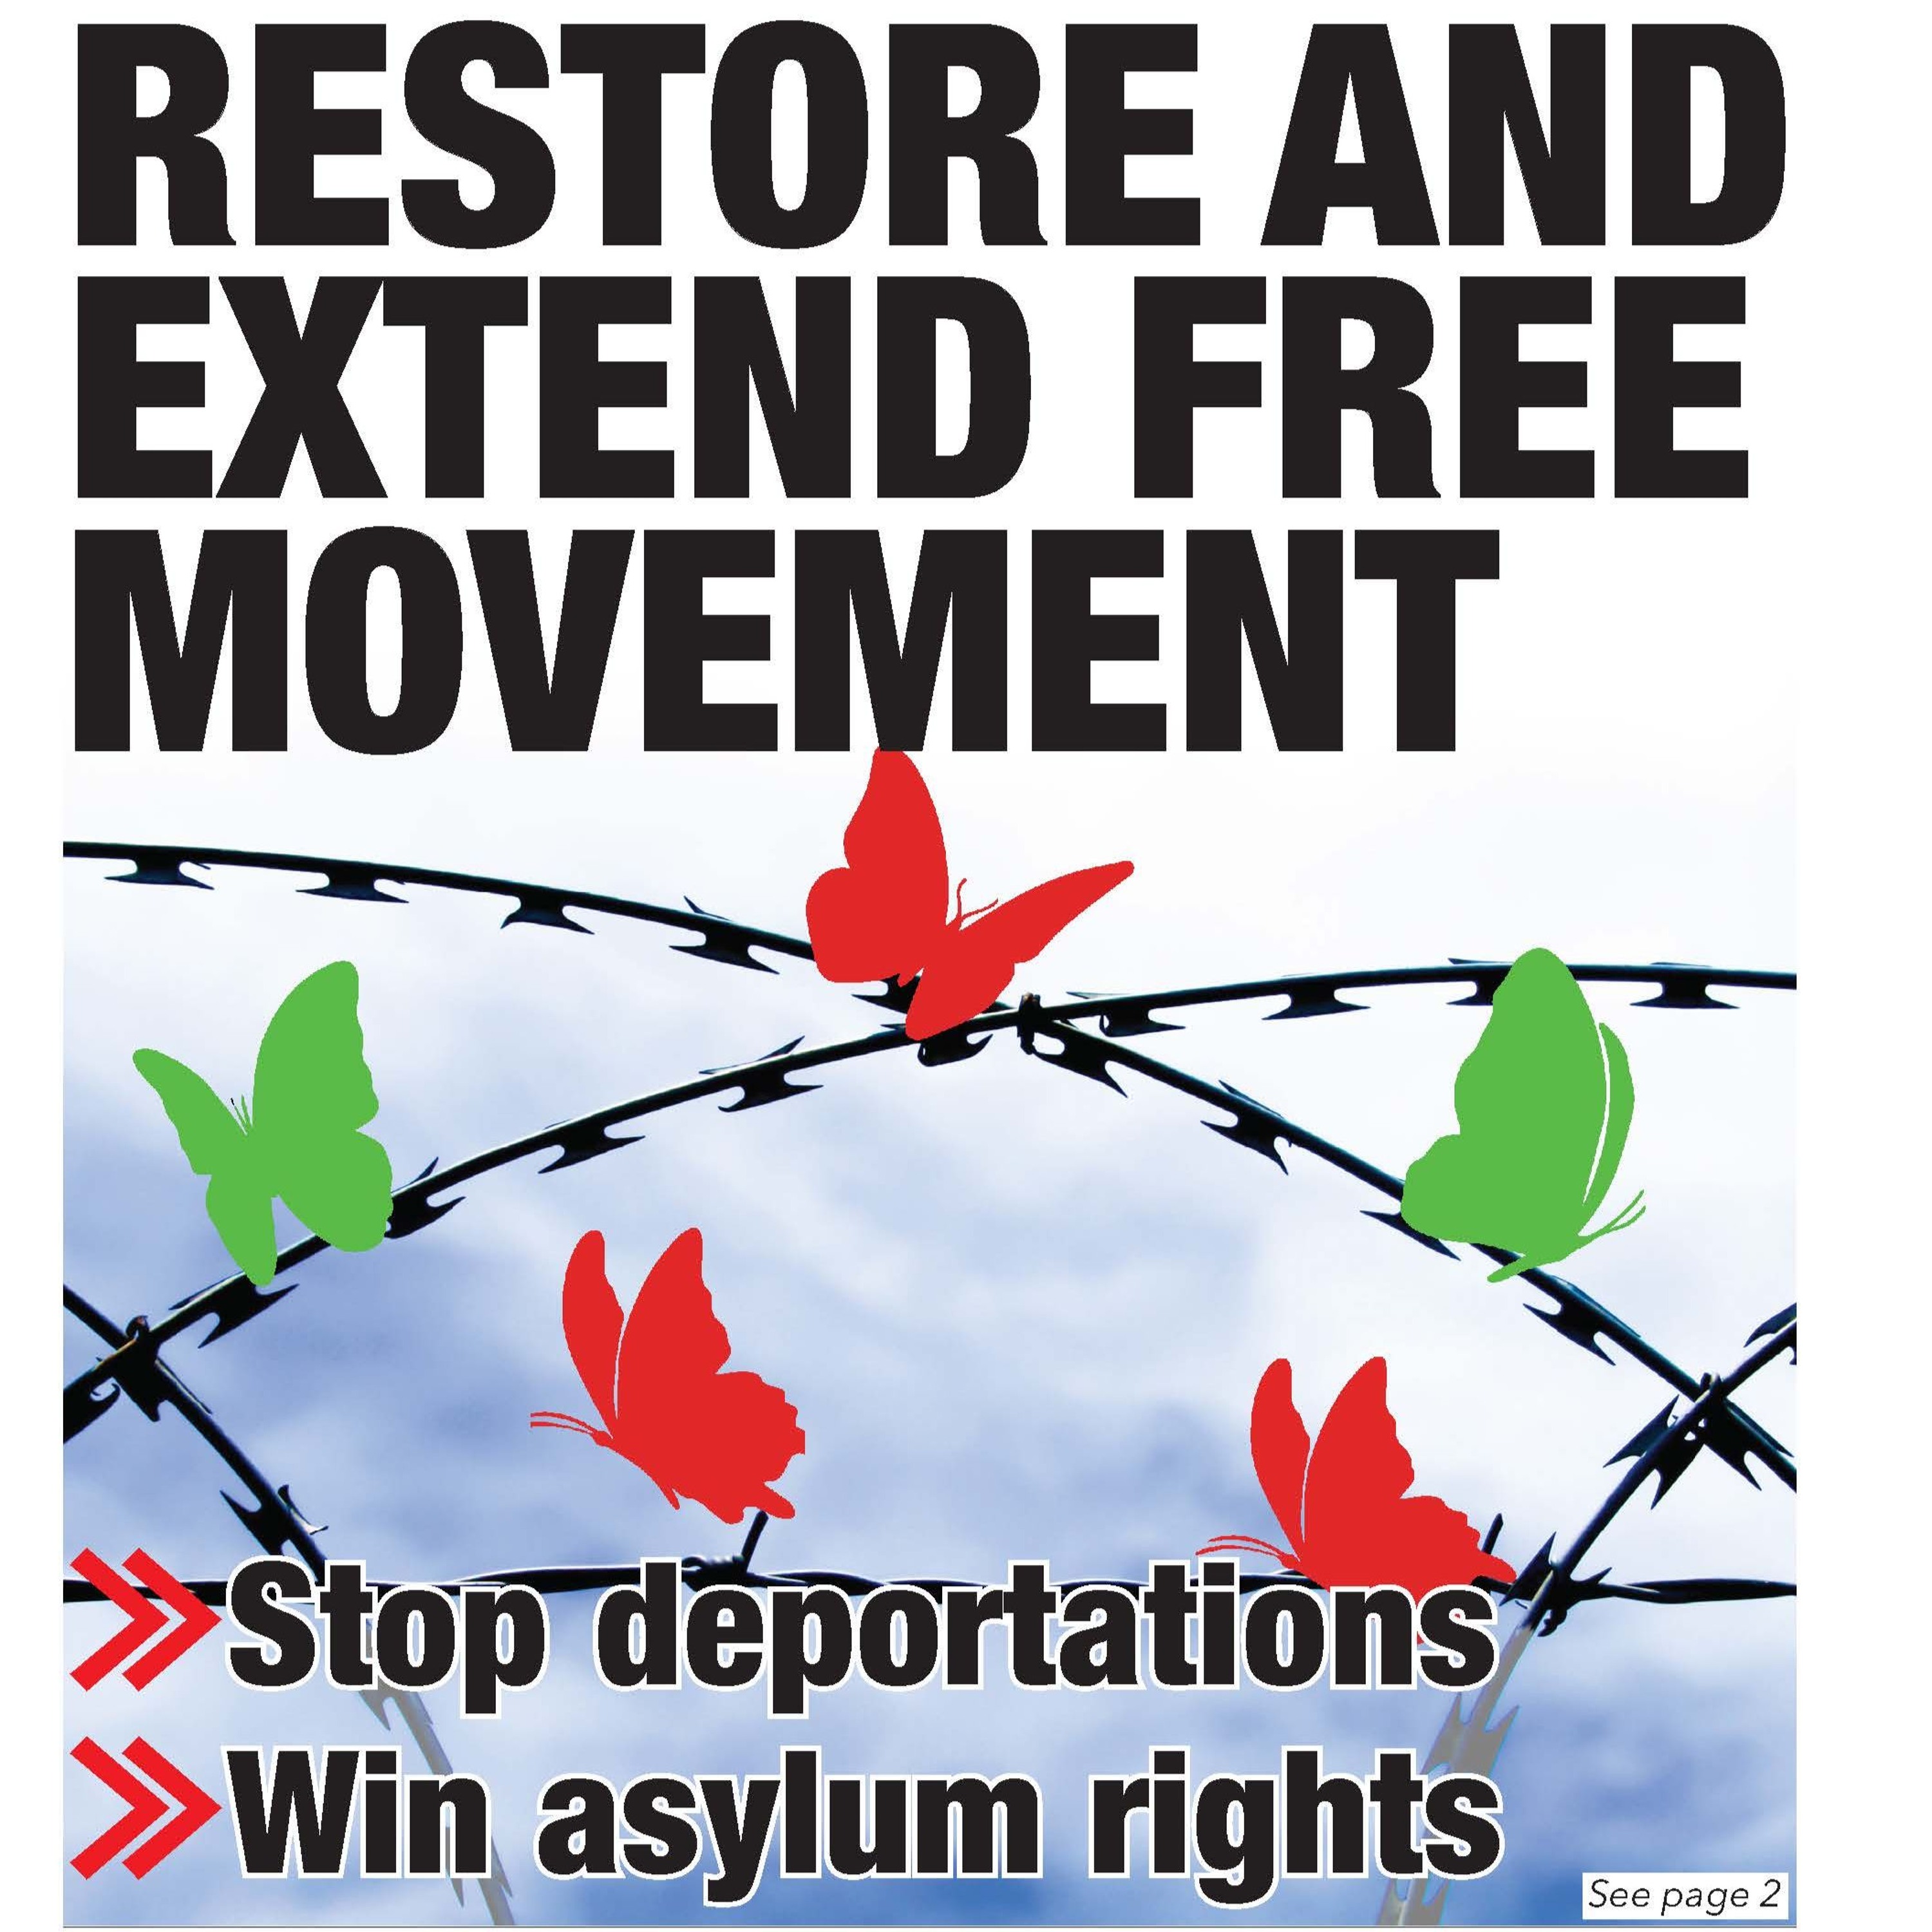 708 — Restore and extend free movement: stop deportations; win asylum rights [Corrected]